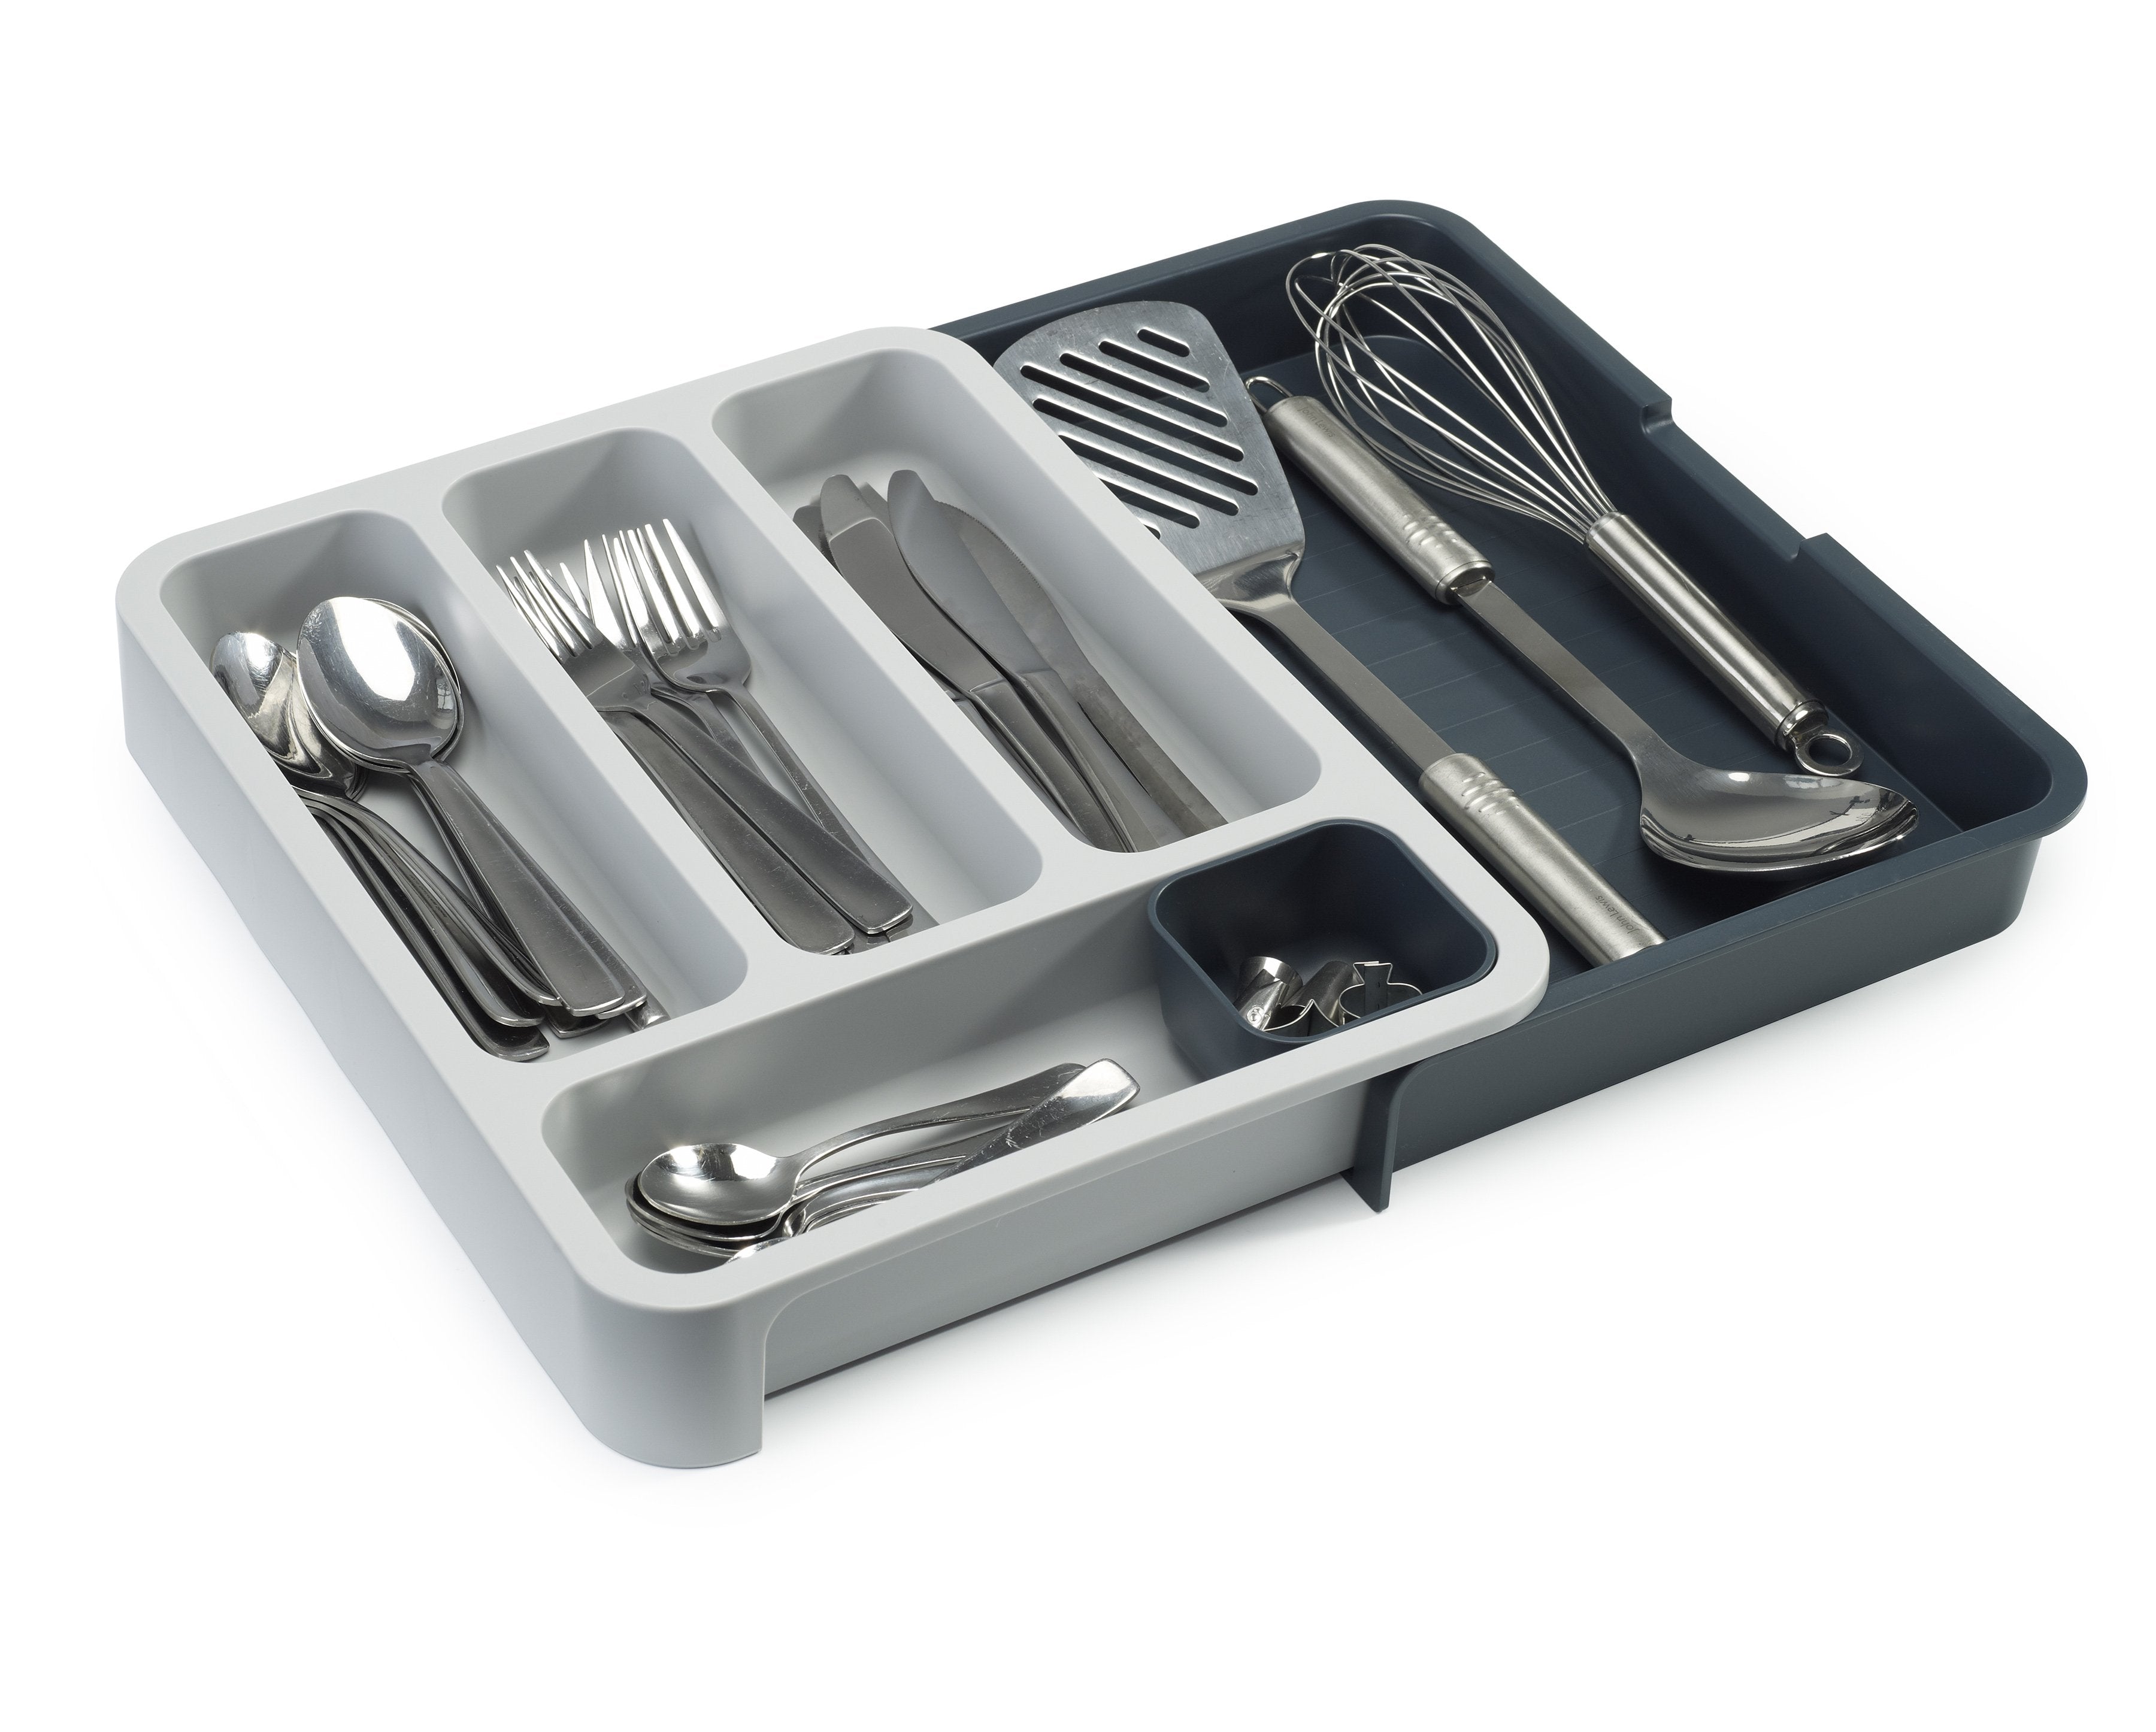 BEON.COM.AU  This clever drawer organiser can be expanded or compacted to fit a range of different drawer sizes and comes with several compartments for all your cutlery and utensils.  Organise cutlery draws with this practical and smart storage solution The two halves of the tray can be finely adjusted to fi... Joseph Joseph at BEON.COM.AU